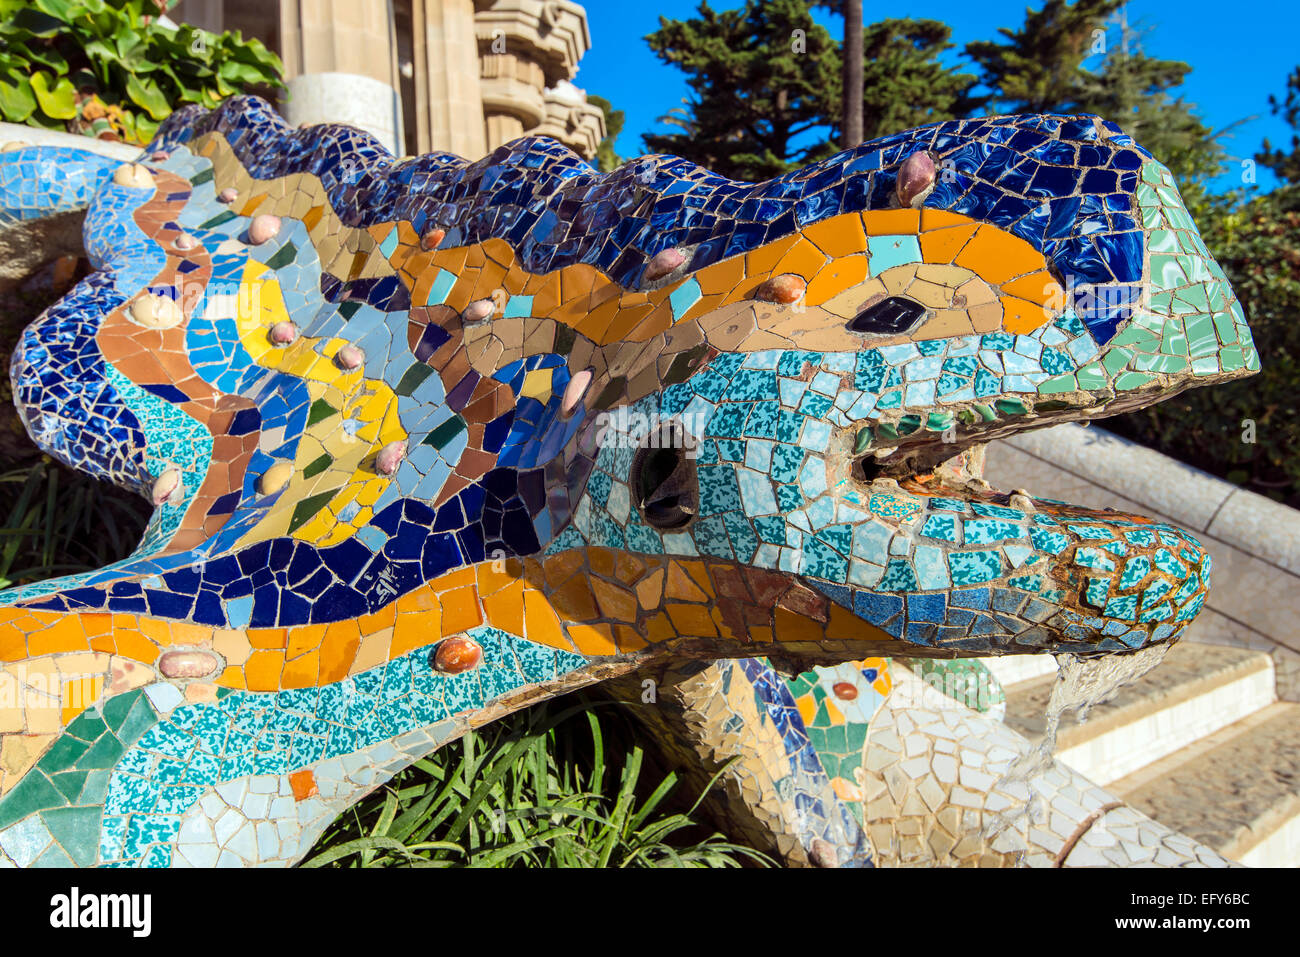 Multicolored mosaic salamander fountain known also as “el drac” or dragon at Park Guell or Parc Guell, Barcelona, Catalonia, Spa Stock Photo